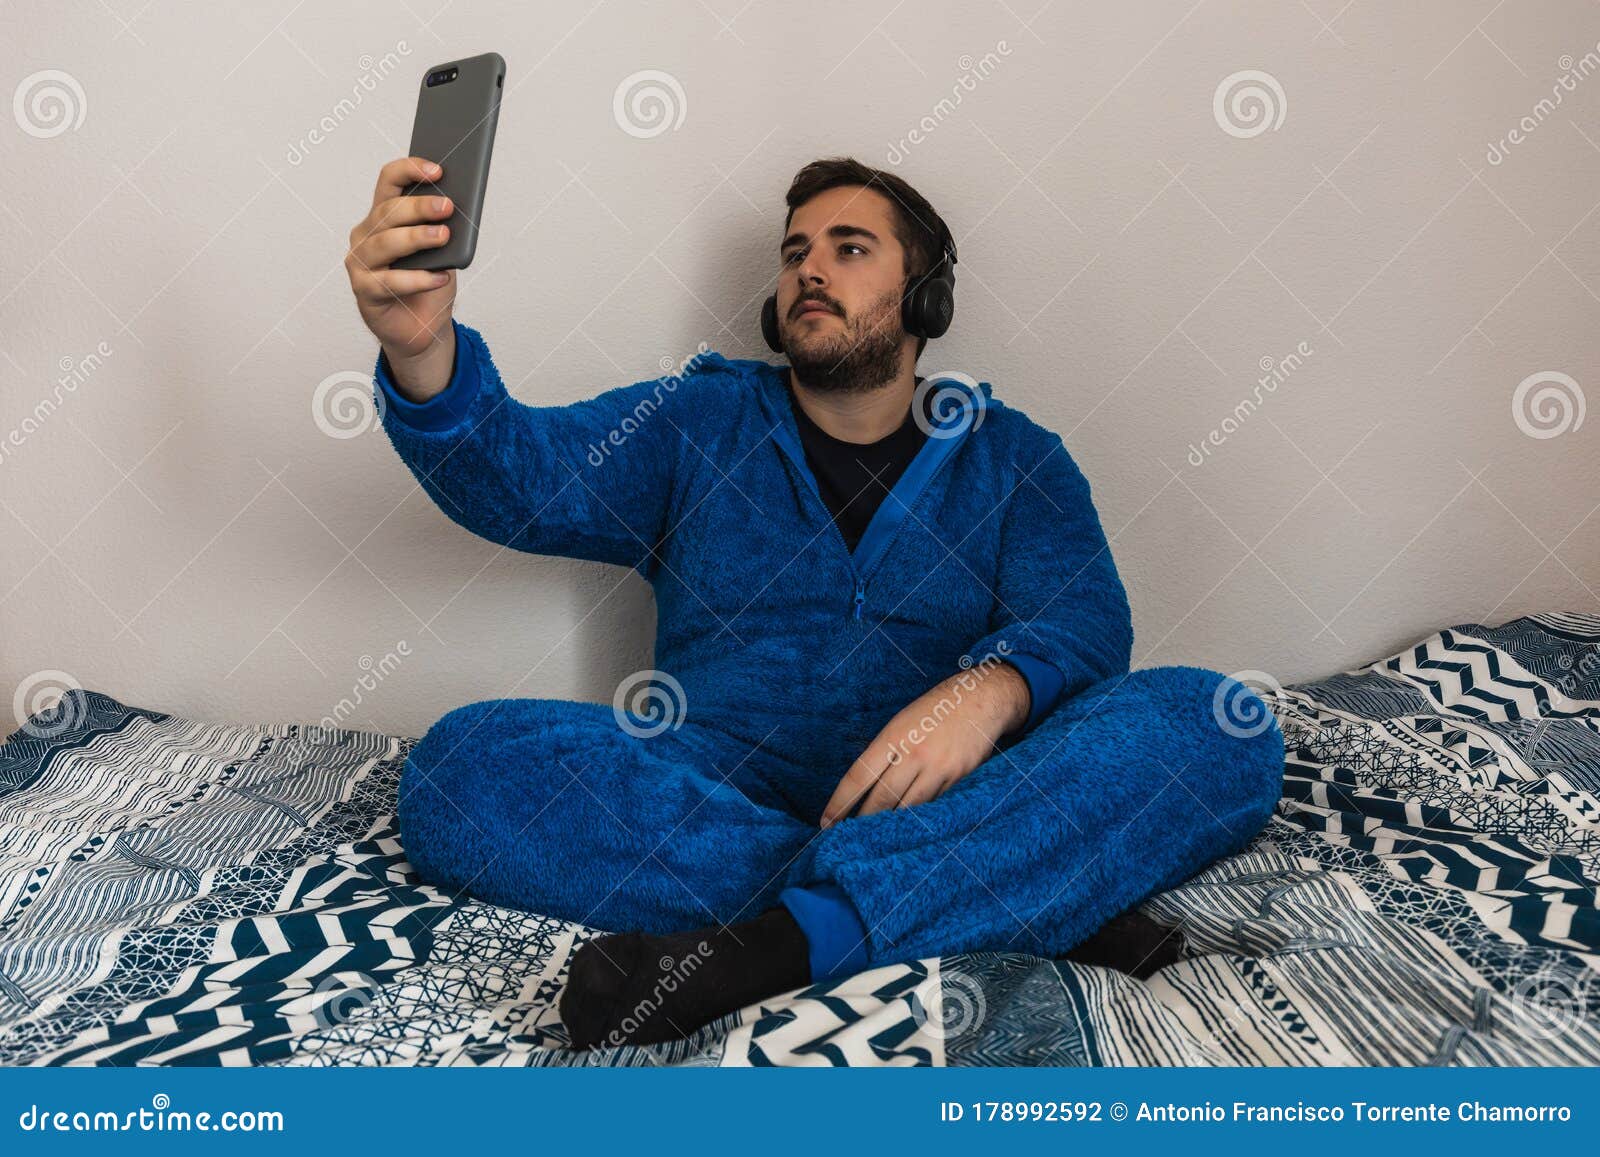 Funny Young Guy in a Fantastic Pyjama in His Bedroom. he is Taking a Selfie  Stock Photo - Image of person, technology: 178992592